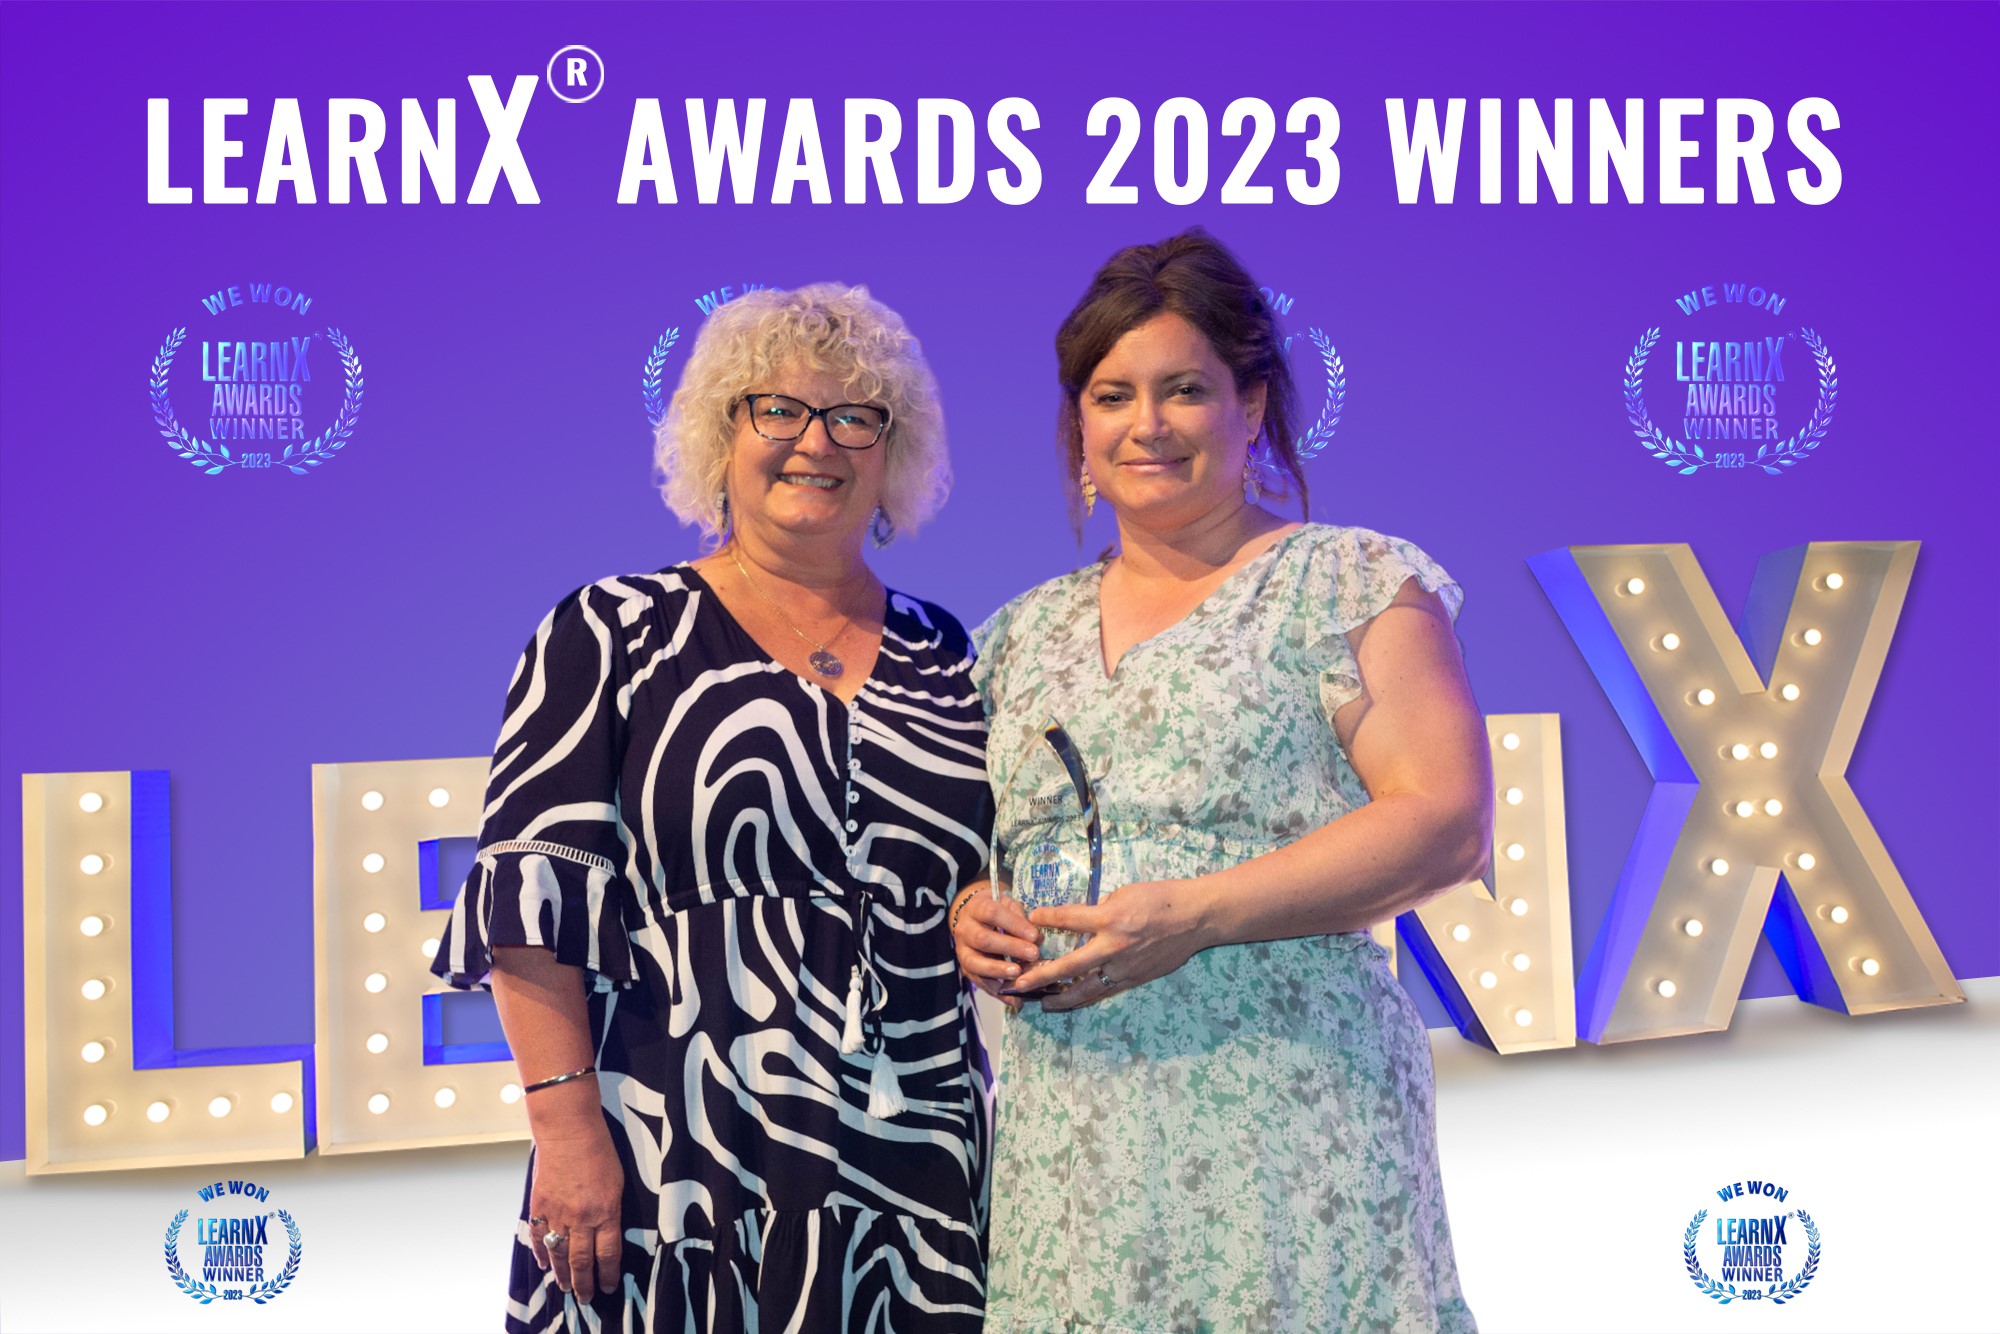 Two ladies from TasTAFE holding a trophy that they won at the learn X Awards